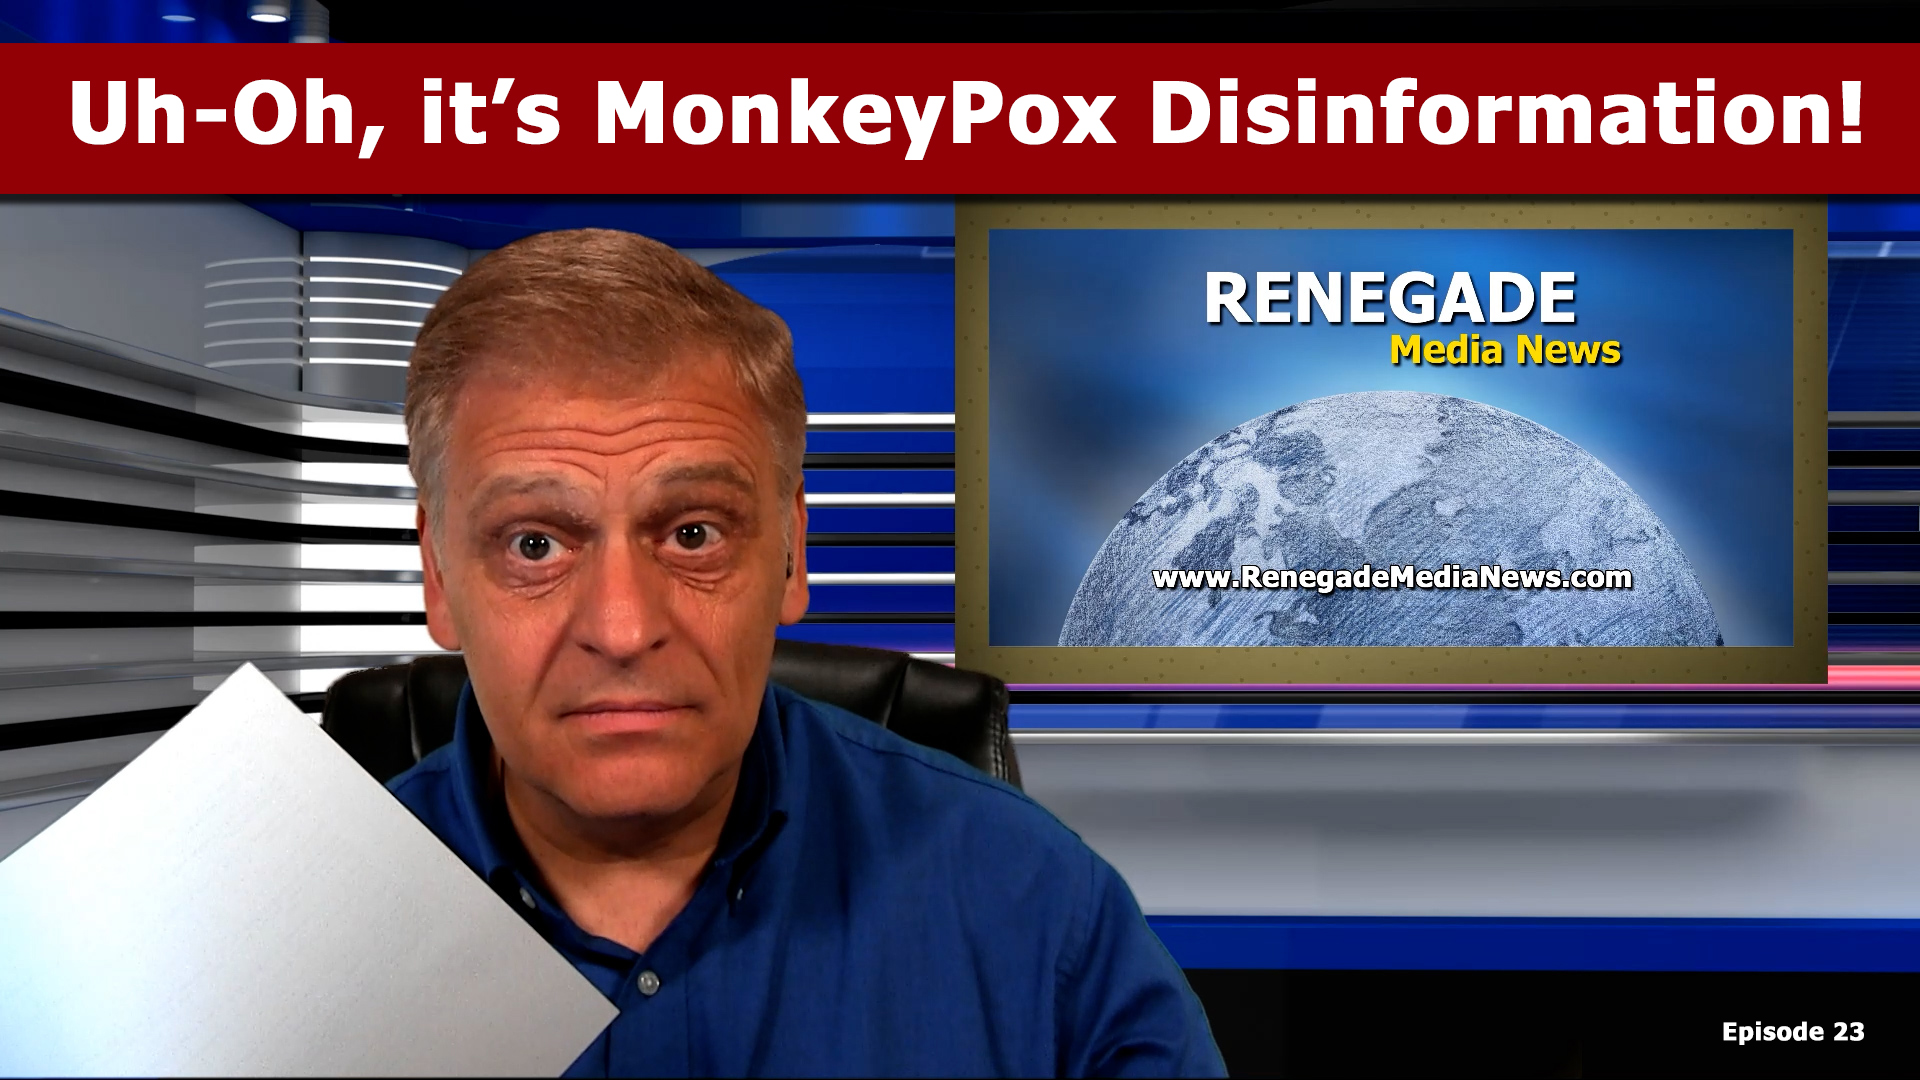 The WHO Fights Monkeypox Disinformation!